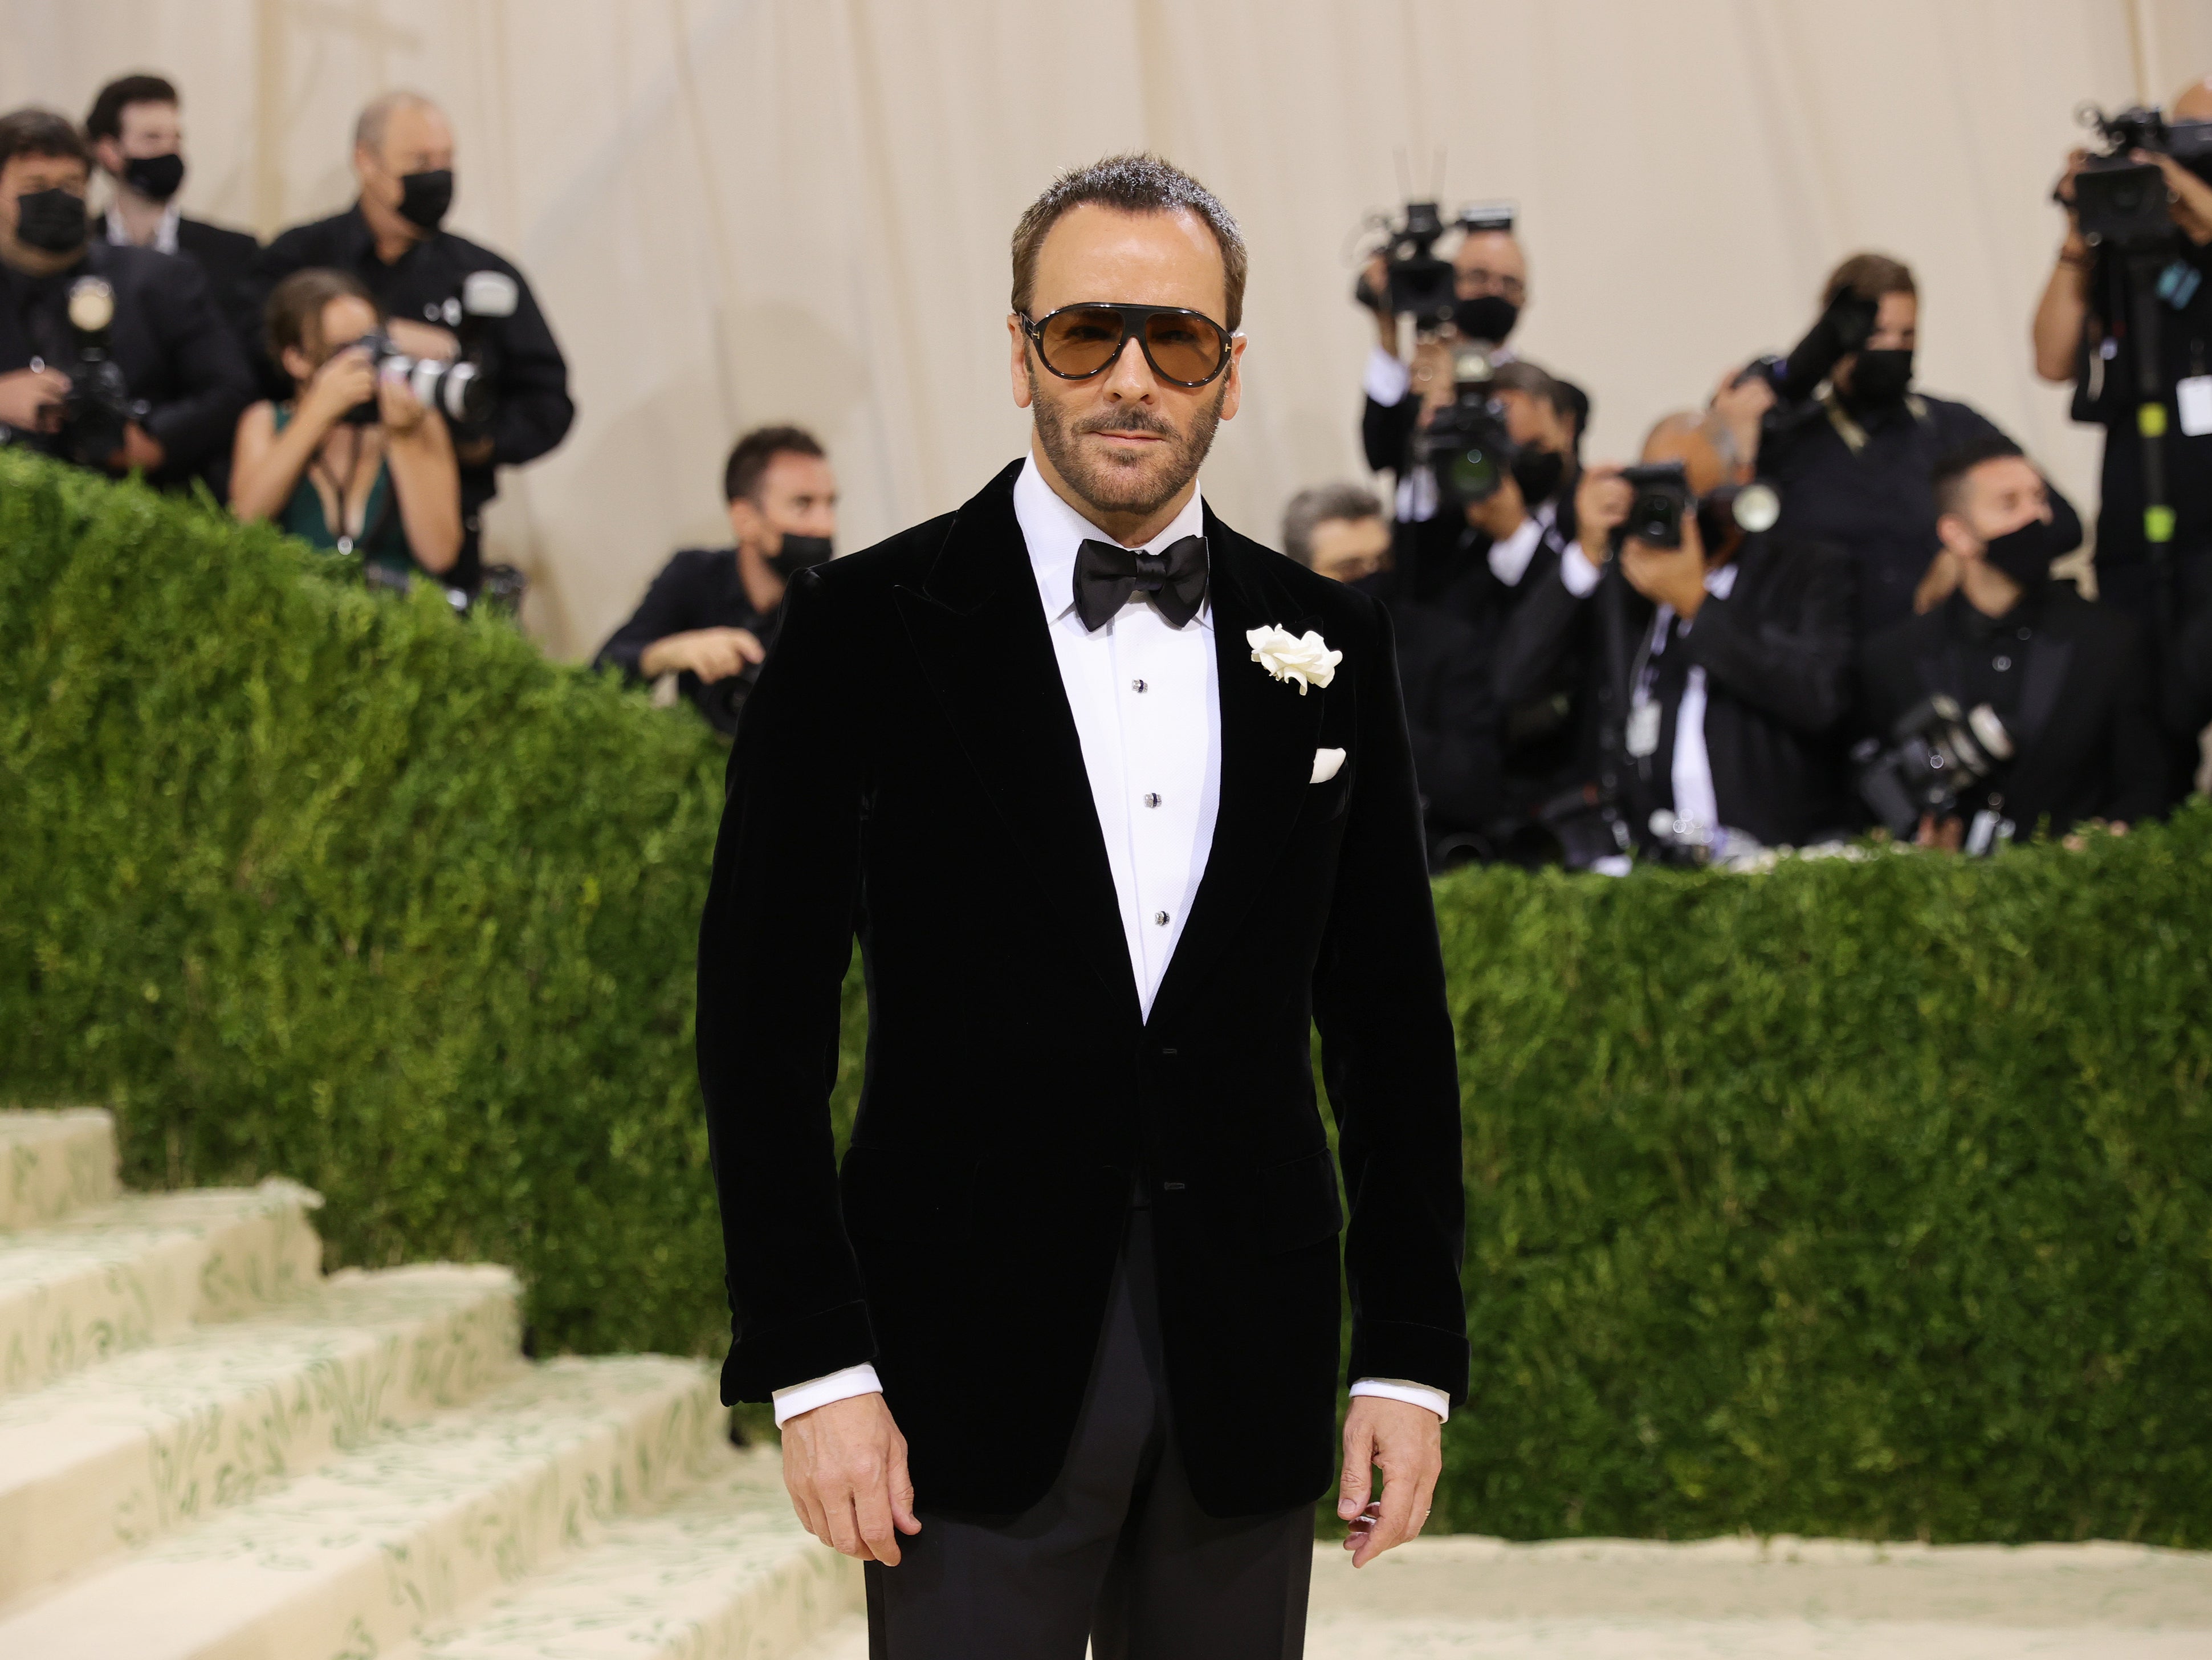 Honorary chair Tom Ford attends The 2021 Met Gala Celebrating In America: A Lexicon Of Fashion at Metropolitan Museum of Art on September 13, 2021